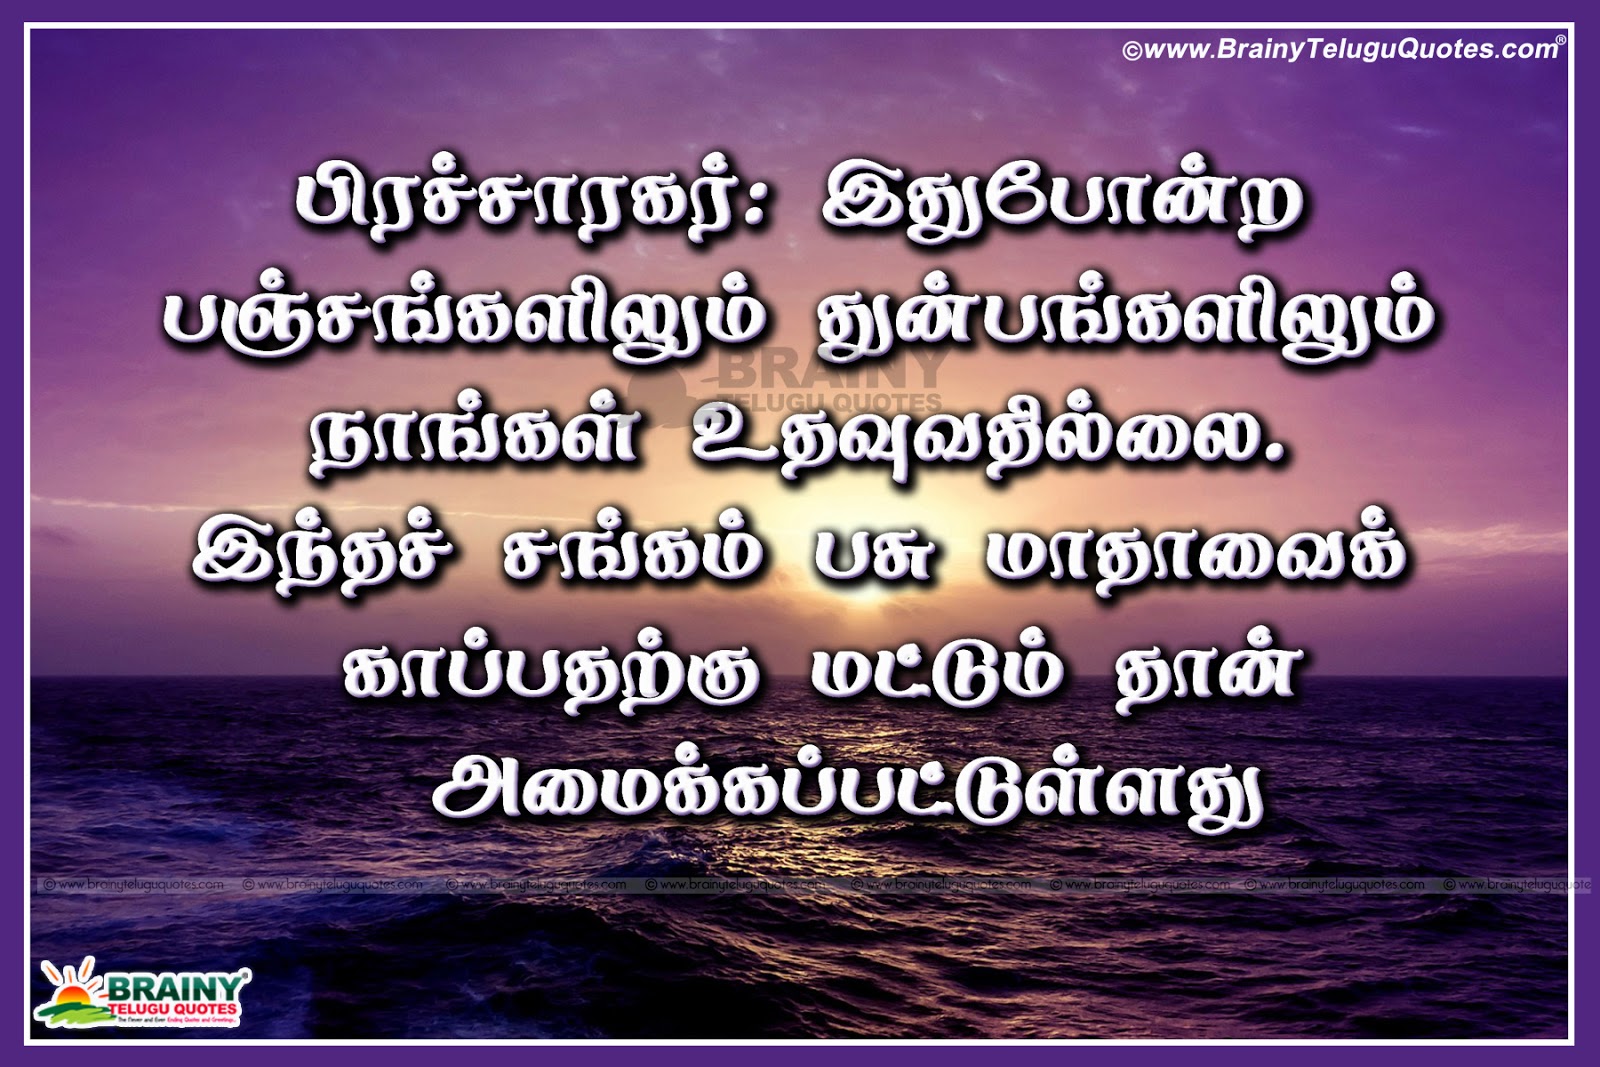 Tamil Kavithaigal And Inspiration Quotes Images